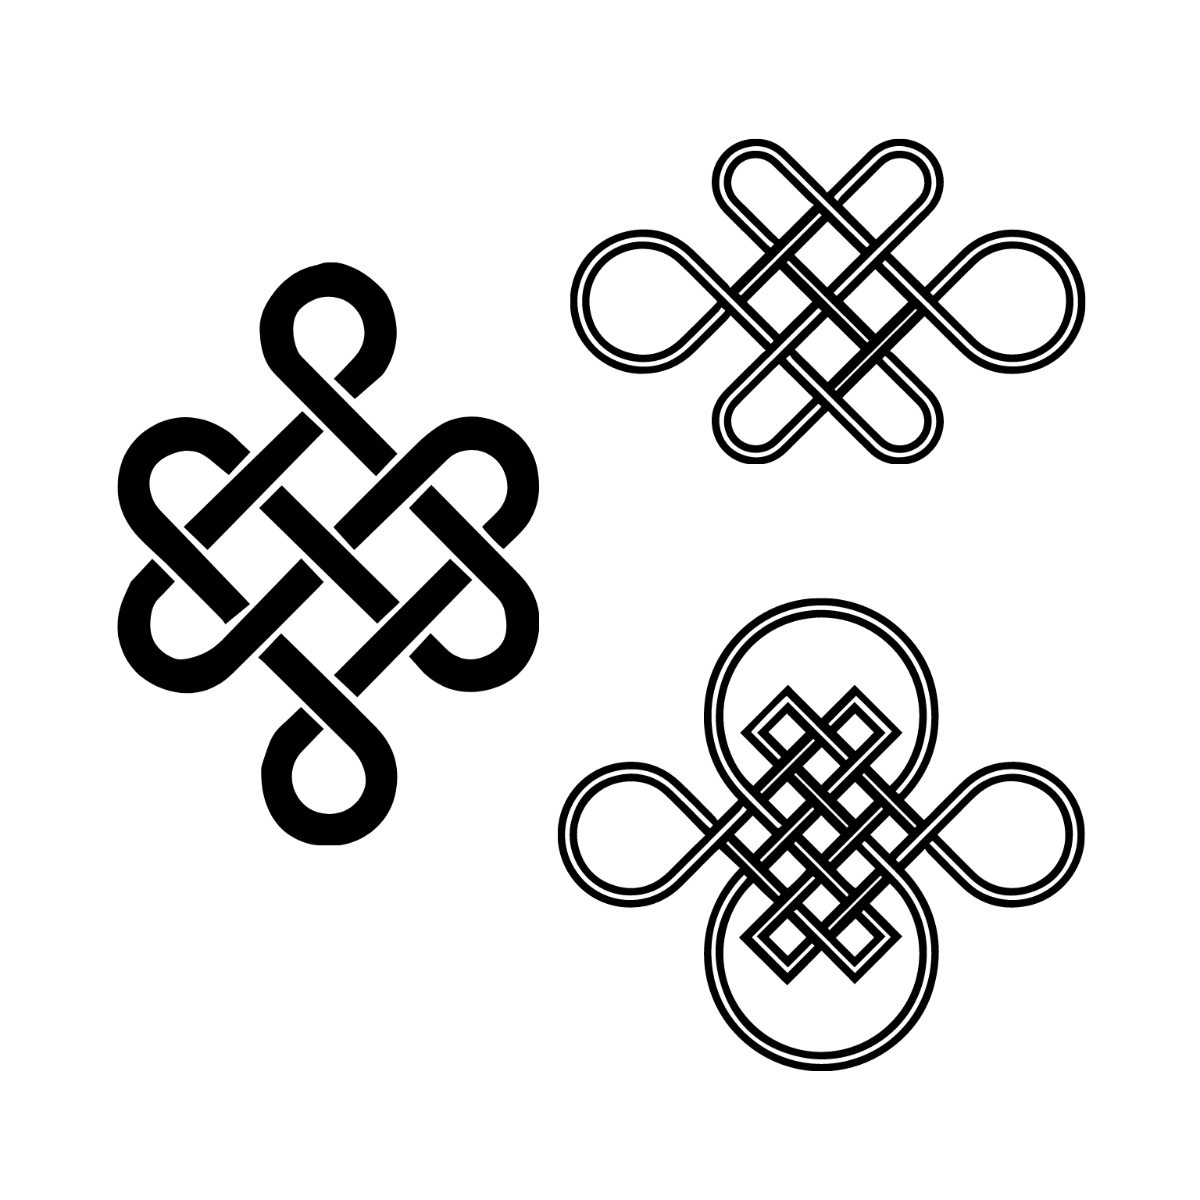 FREE Knot Vector Templates & Examples - Edit Online & Download ...